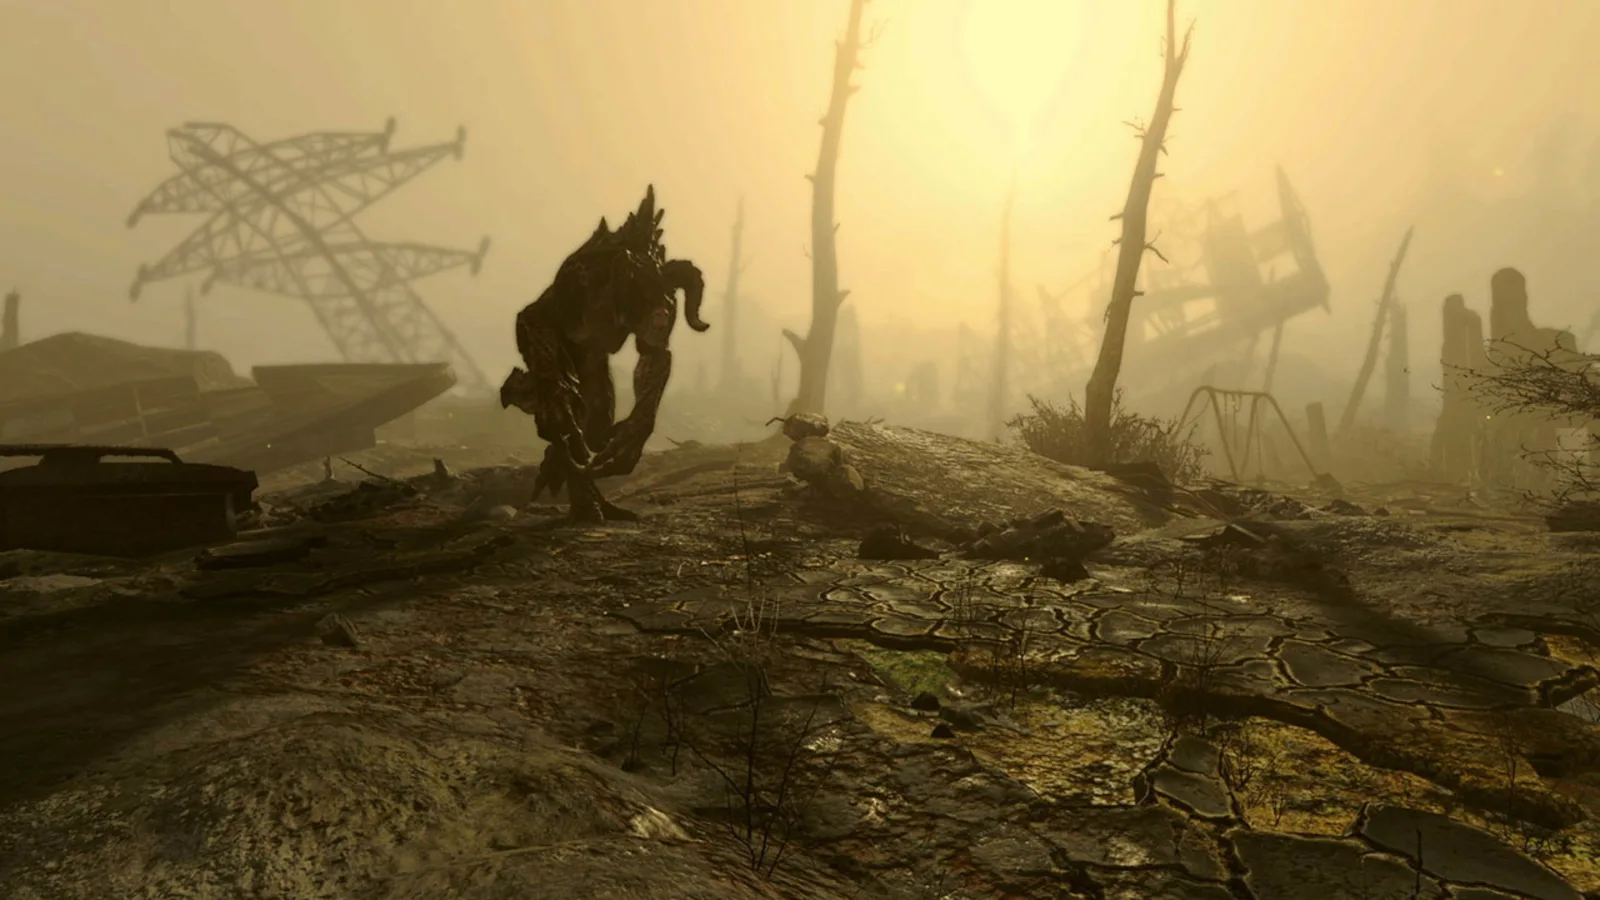 Cormac McCarthy gave post-apocalyptic video games their flavour